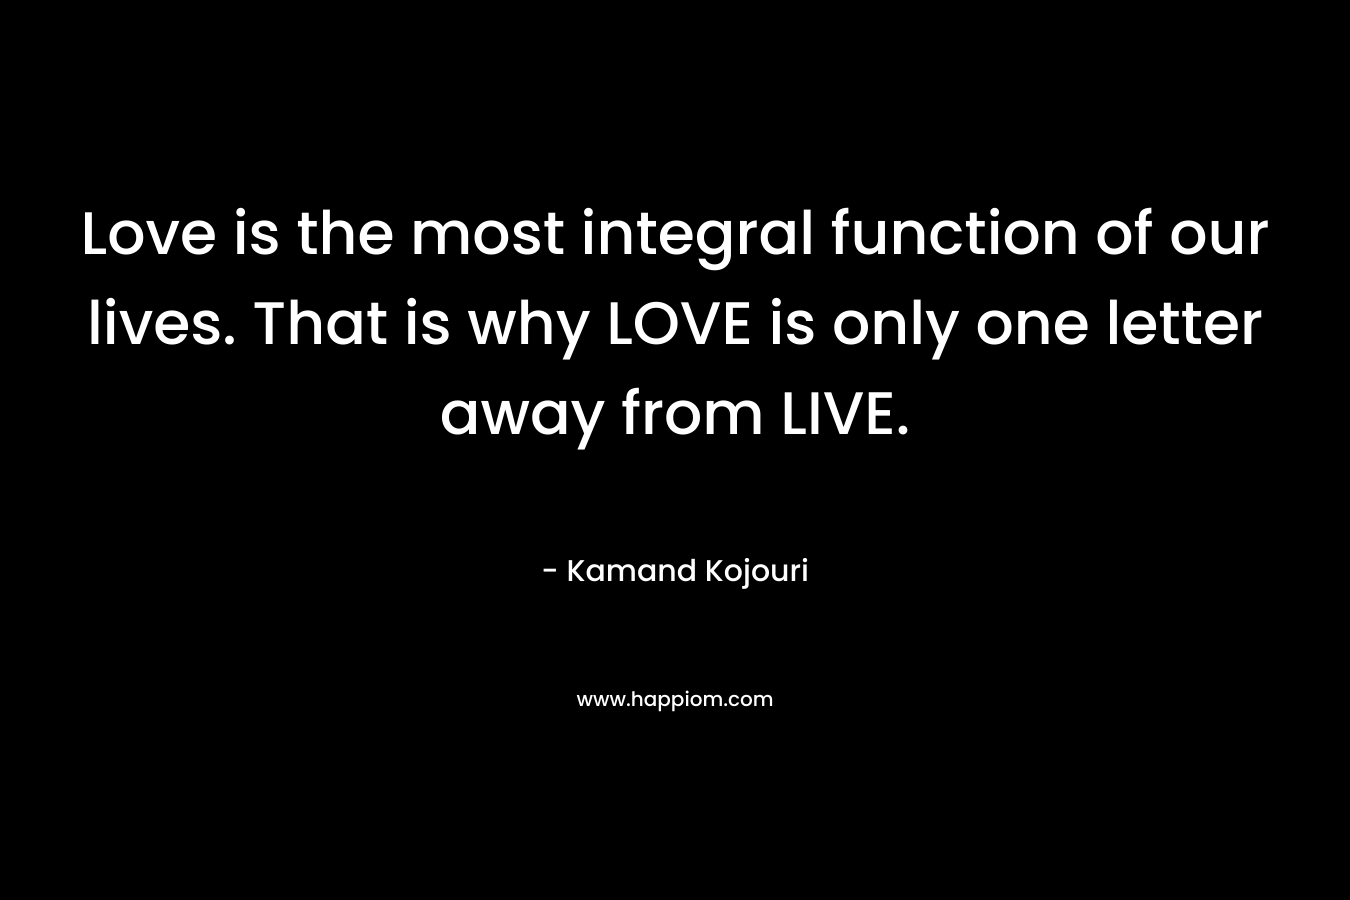 Love is the most integral function of our lives. That is why LOVE is only one letter away from LIVE.